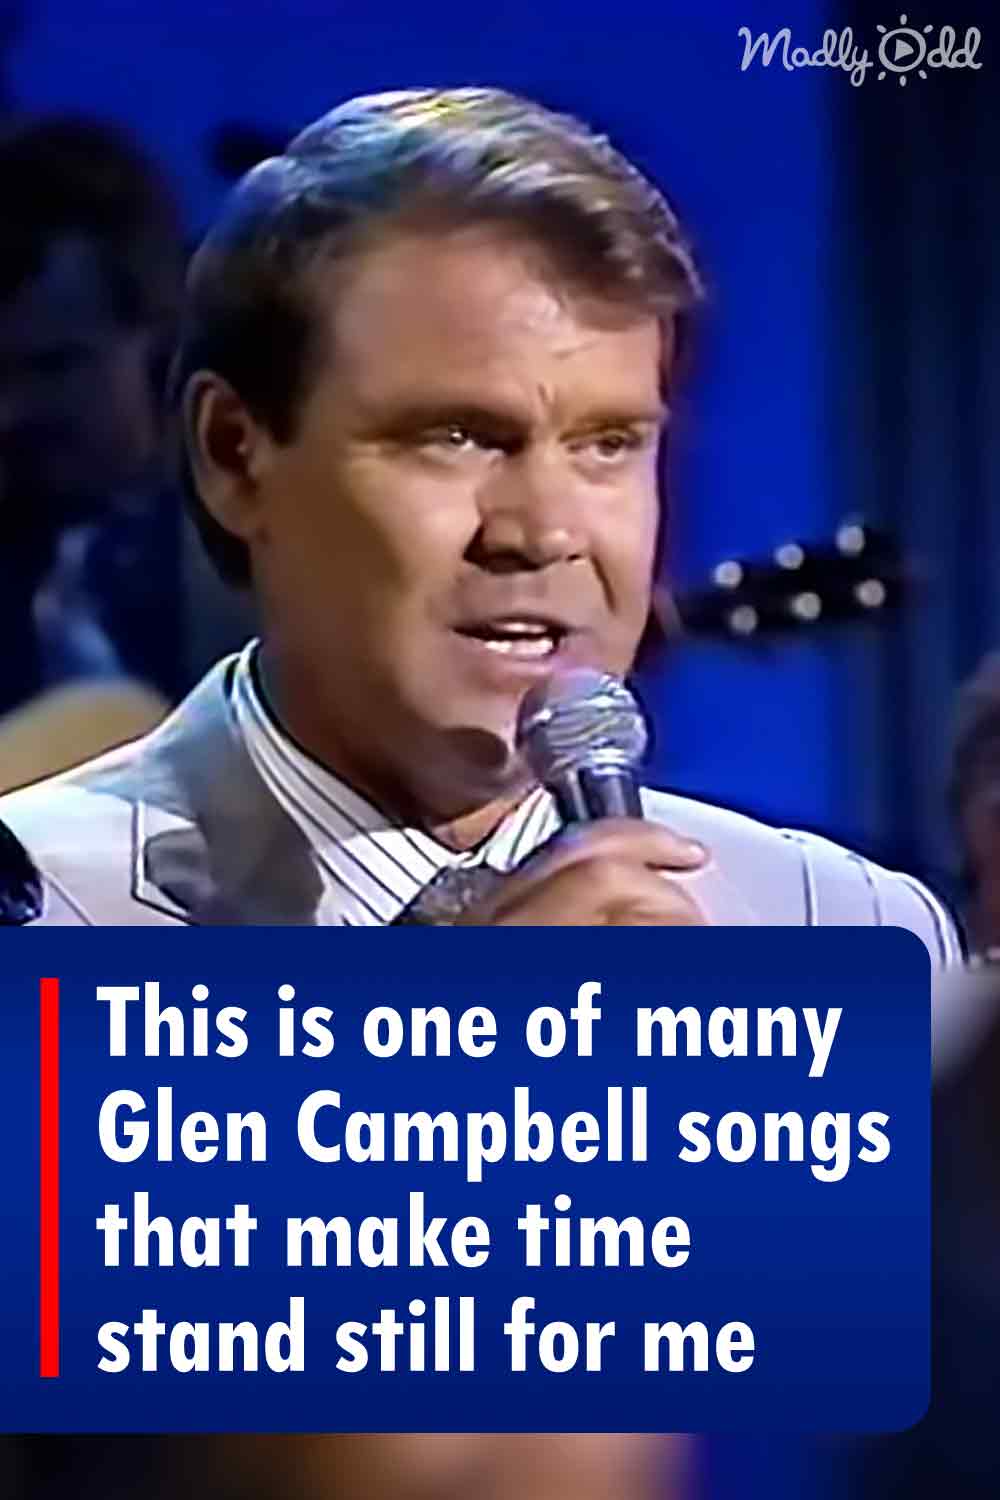 This is one of many Glen Campbell songs that make time stand still for me